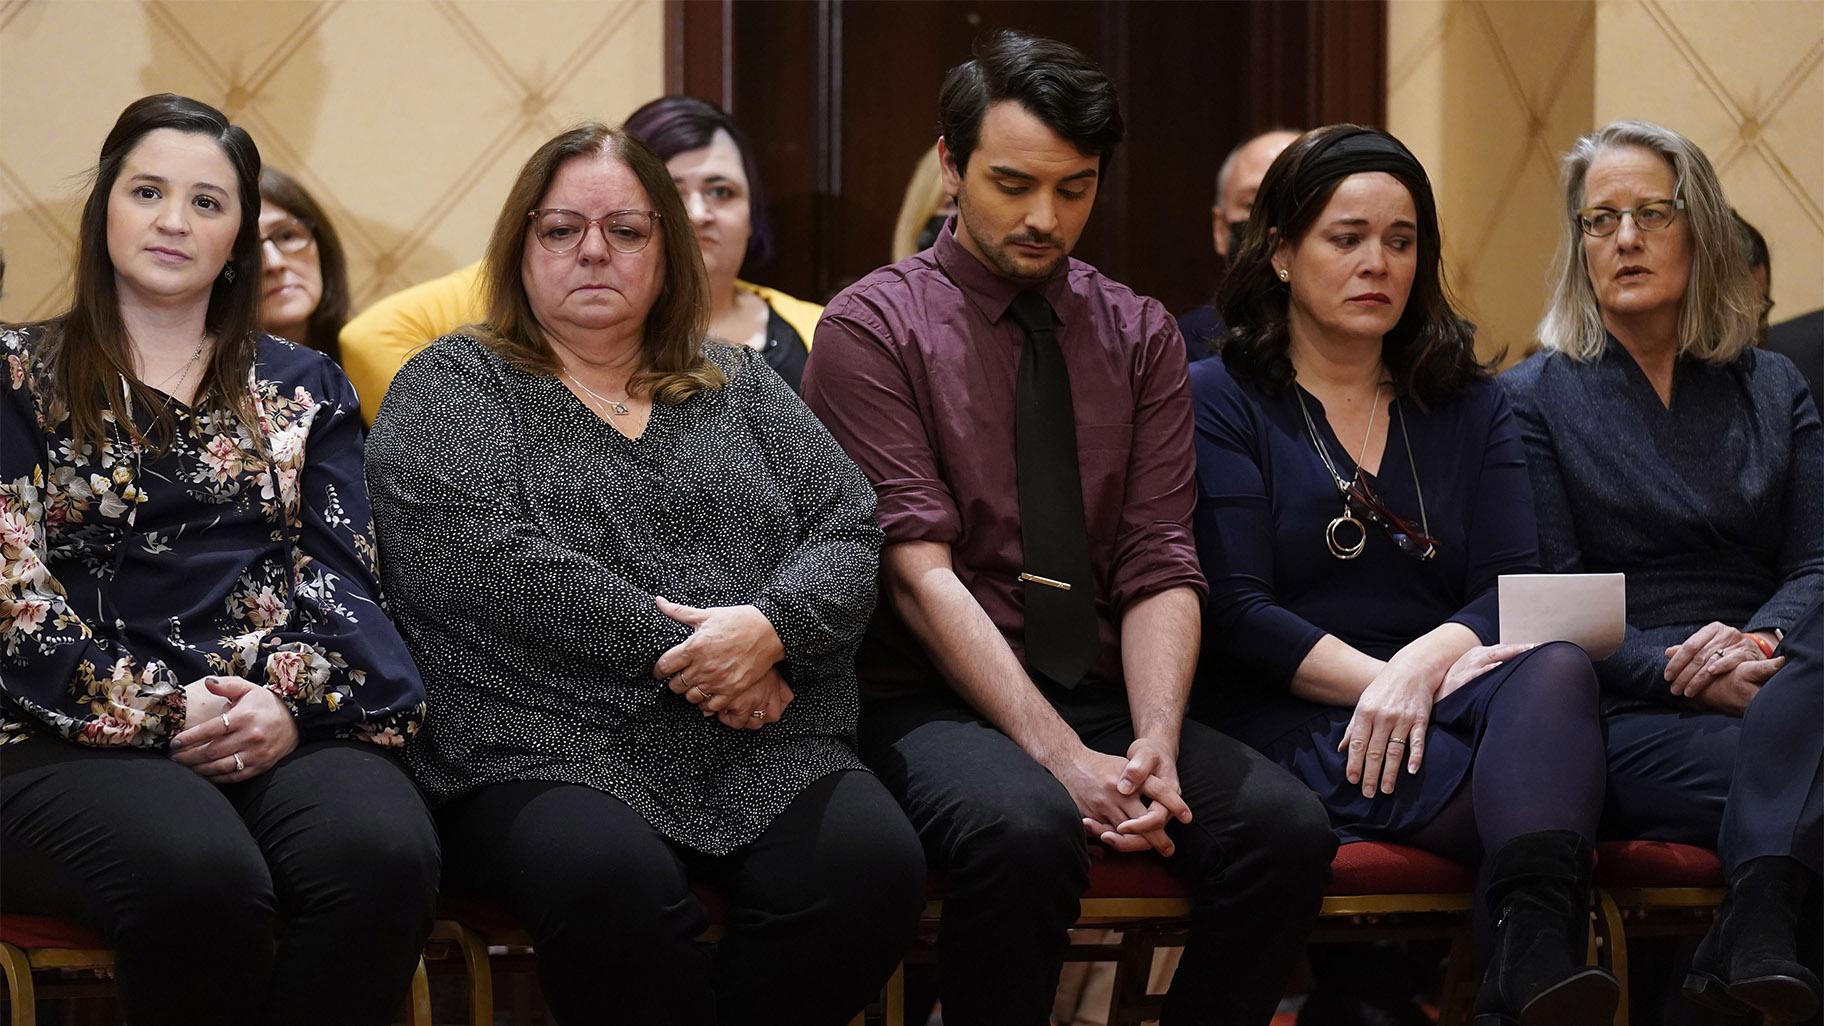 Families of the victims of the Newtown shooting and attorneys listen during a news conference in Trumbull, Conn., Tuesday, Feb. 15, 2022.  (AP Photo / Seth Wenig)